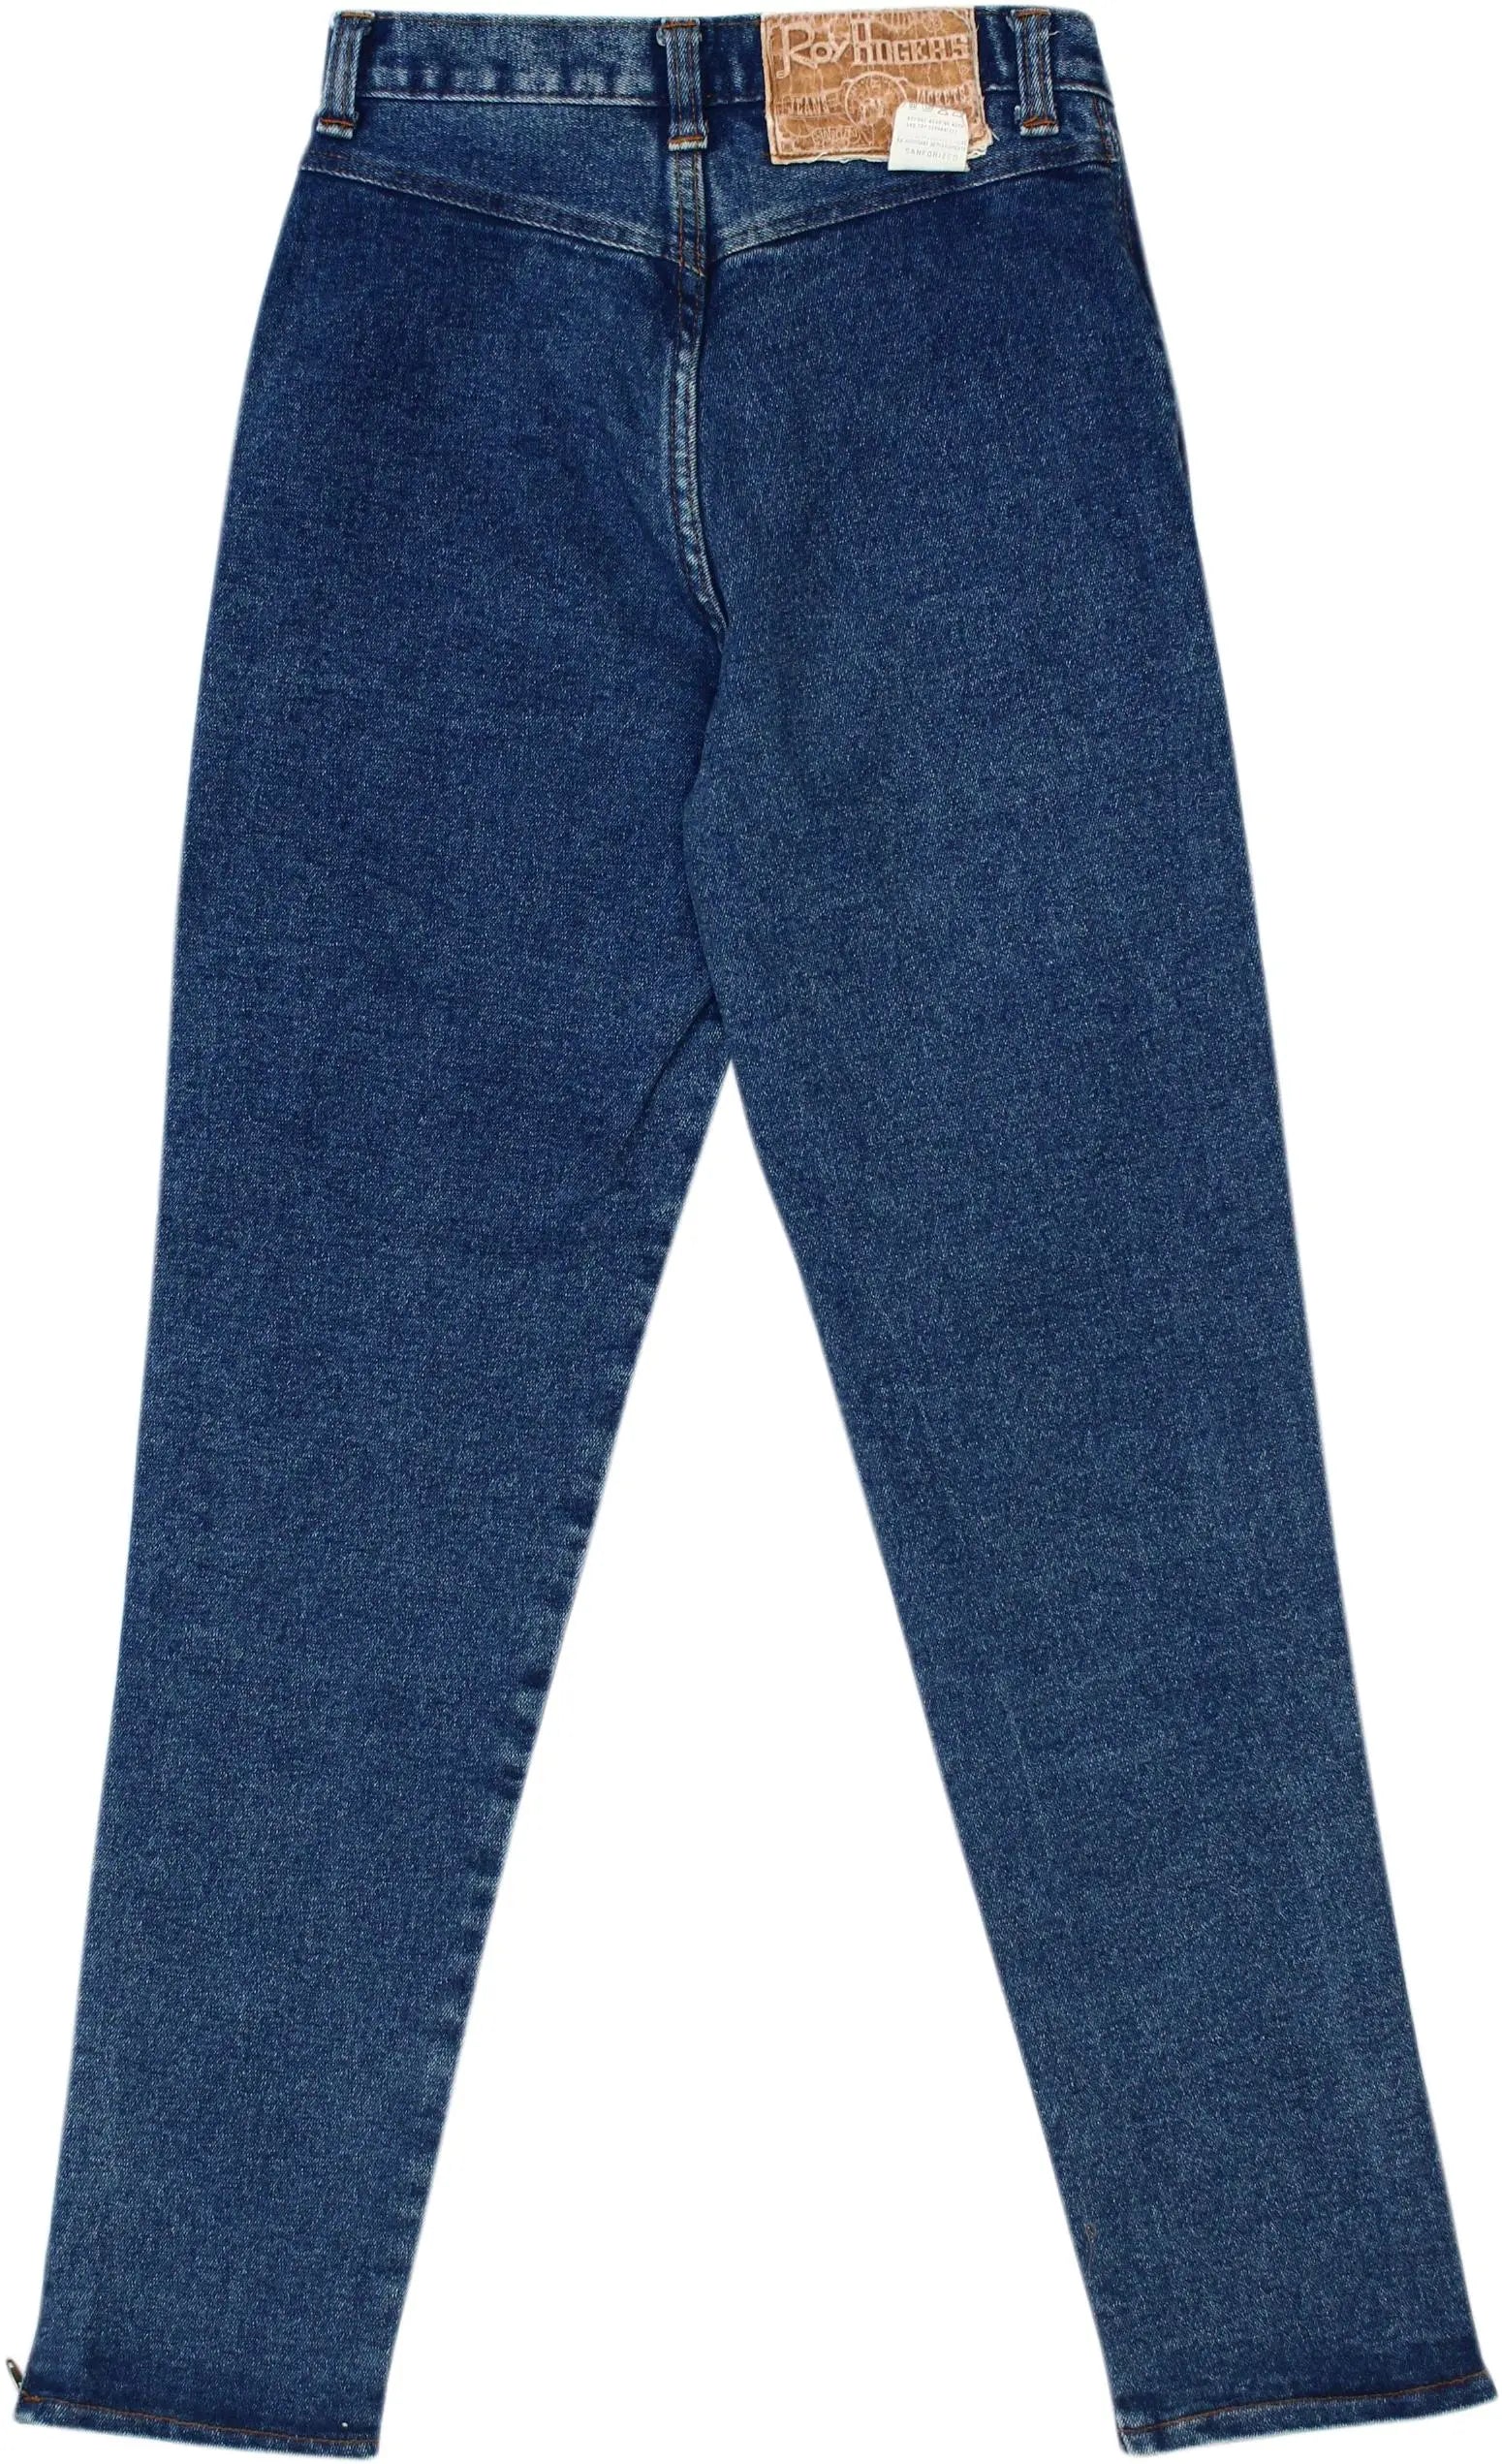 Roy Hodgers - Blue Jeans- ThriftTale.com - Vintage and second handclothing